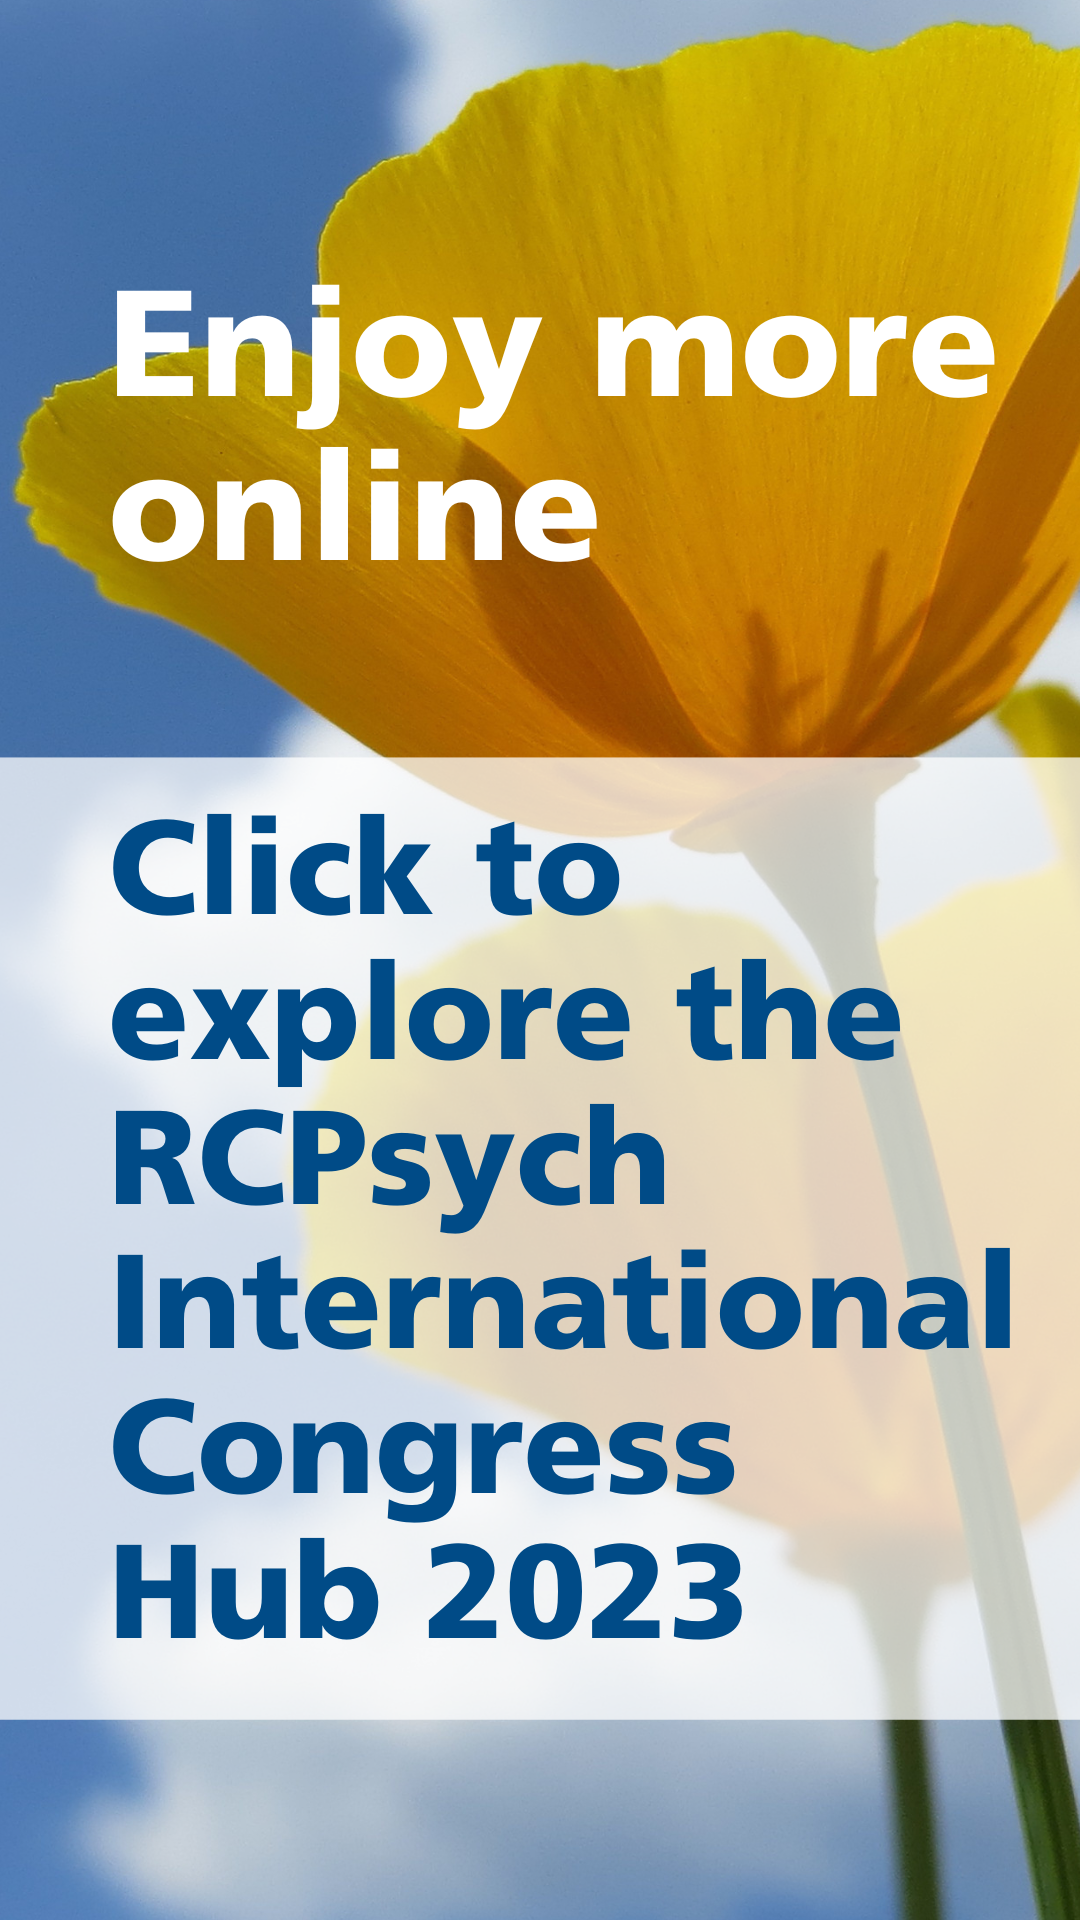 Click to explore the RCPsych International Congress 2023 Hub